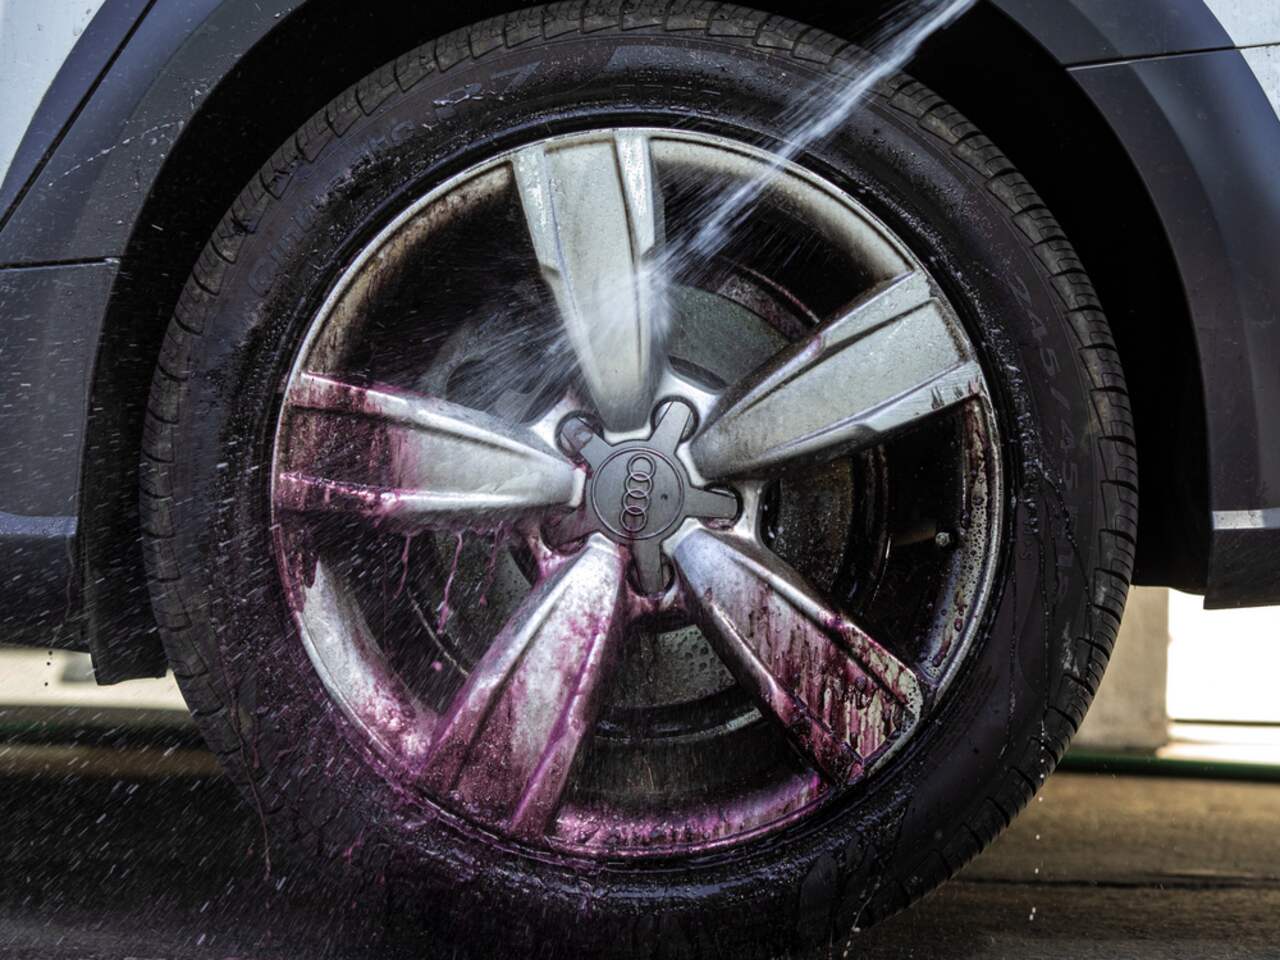 Meguiar's - Ultimate All Wheel Cleaner delivers powerful cleaning